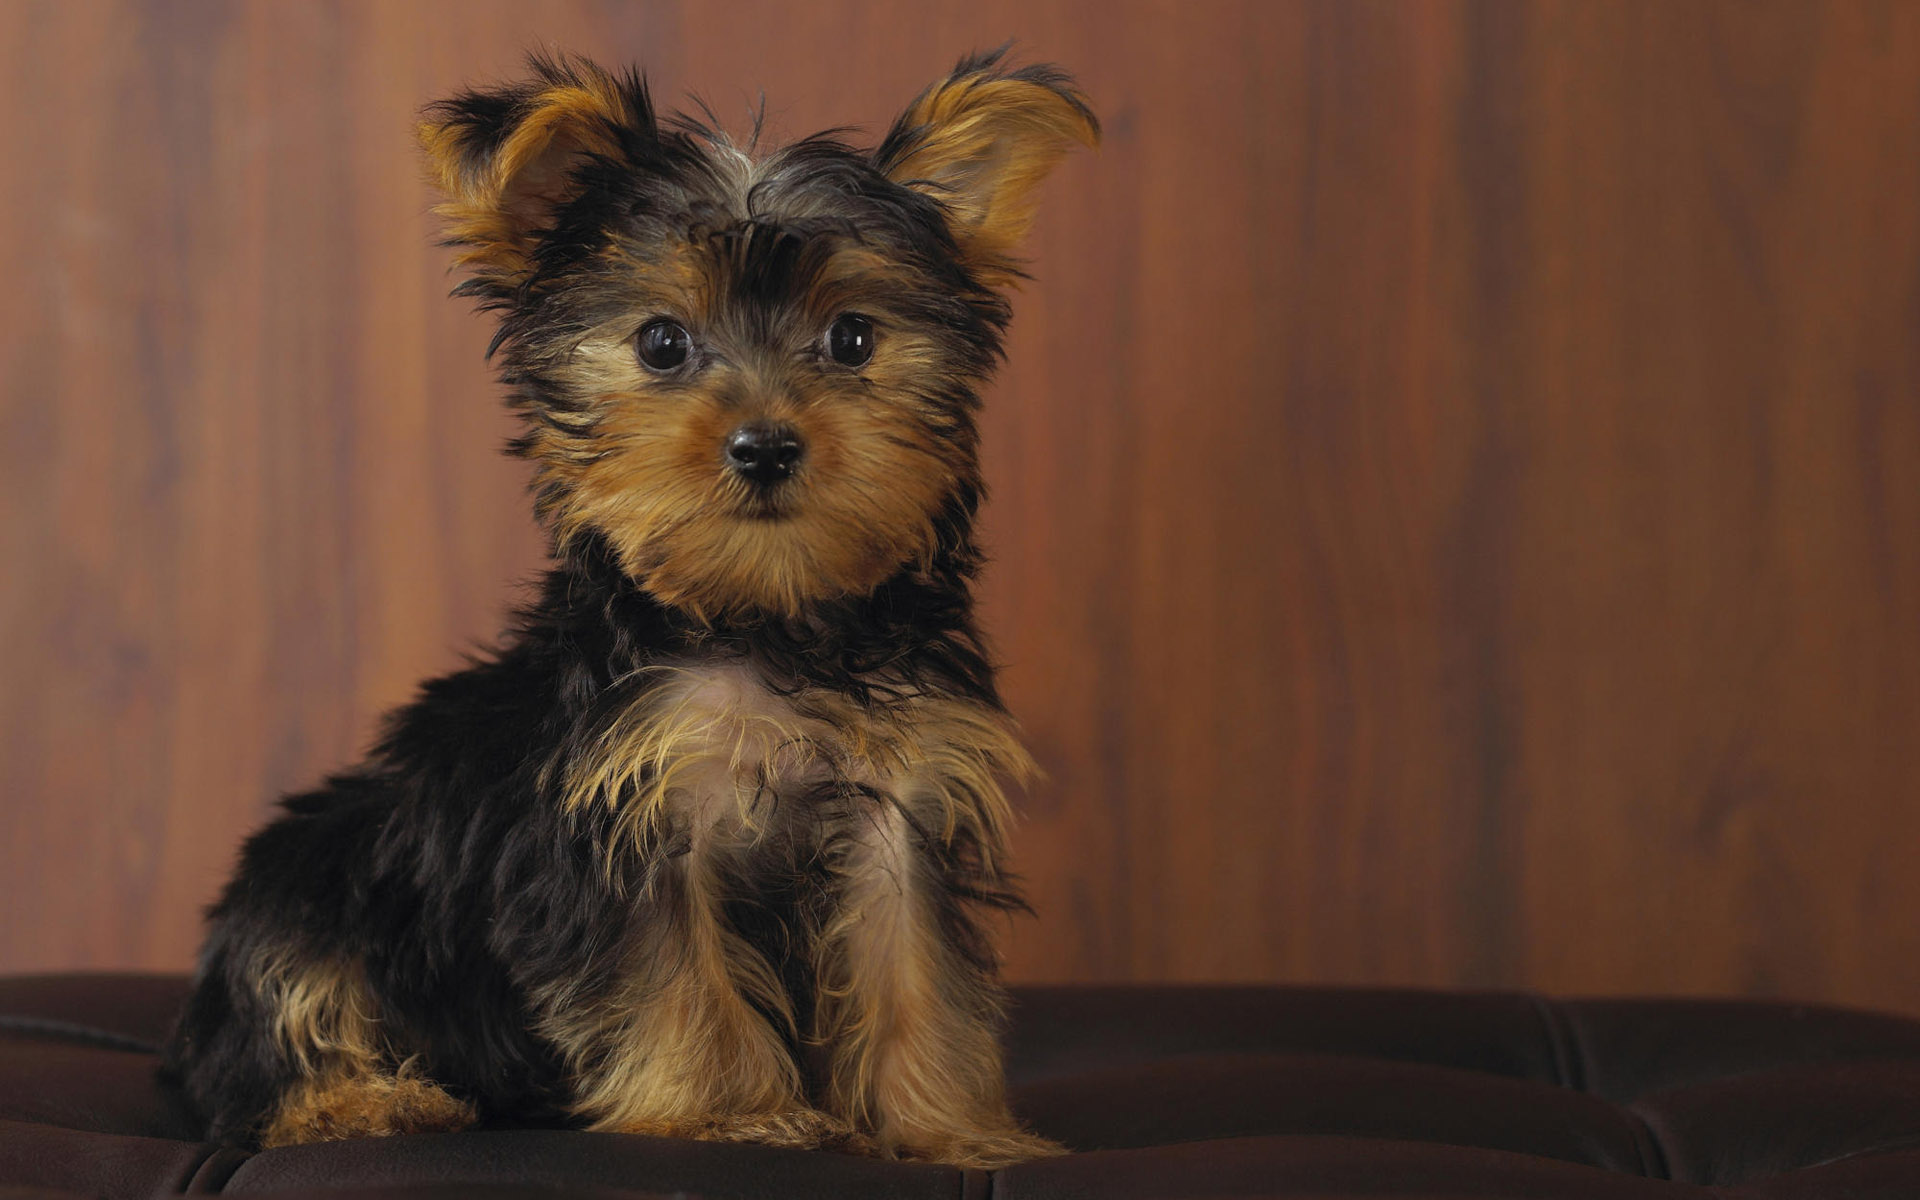 yorkshire terrier, animal, cute, dog, puppy, dogs